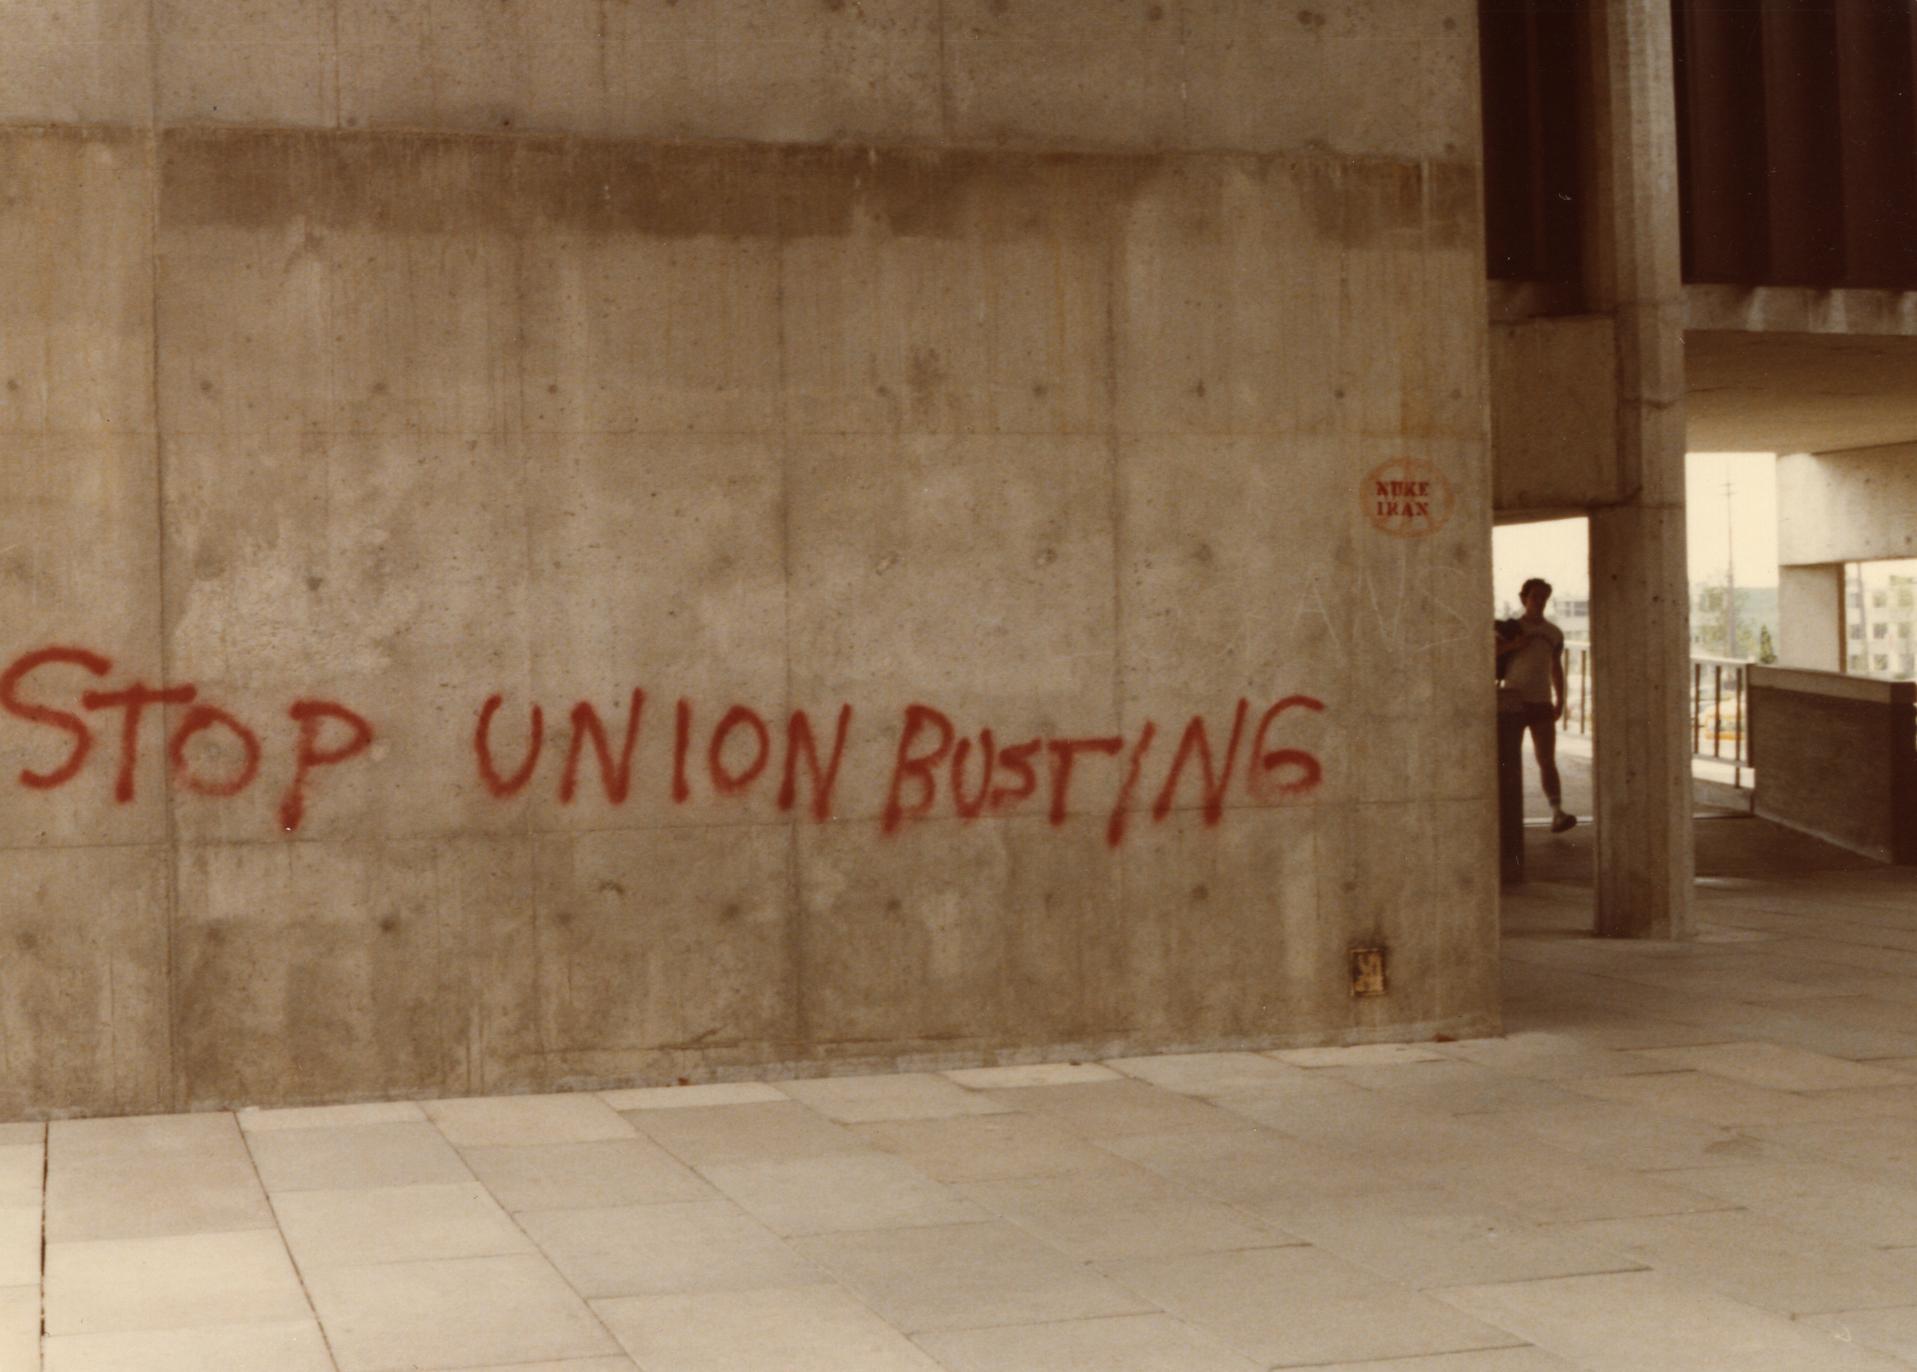 "Stop union busting" graffiti on Mosse Humanities building